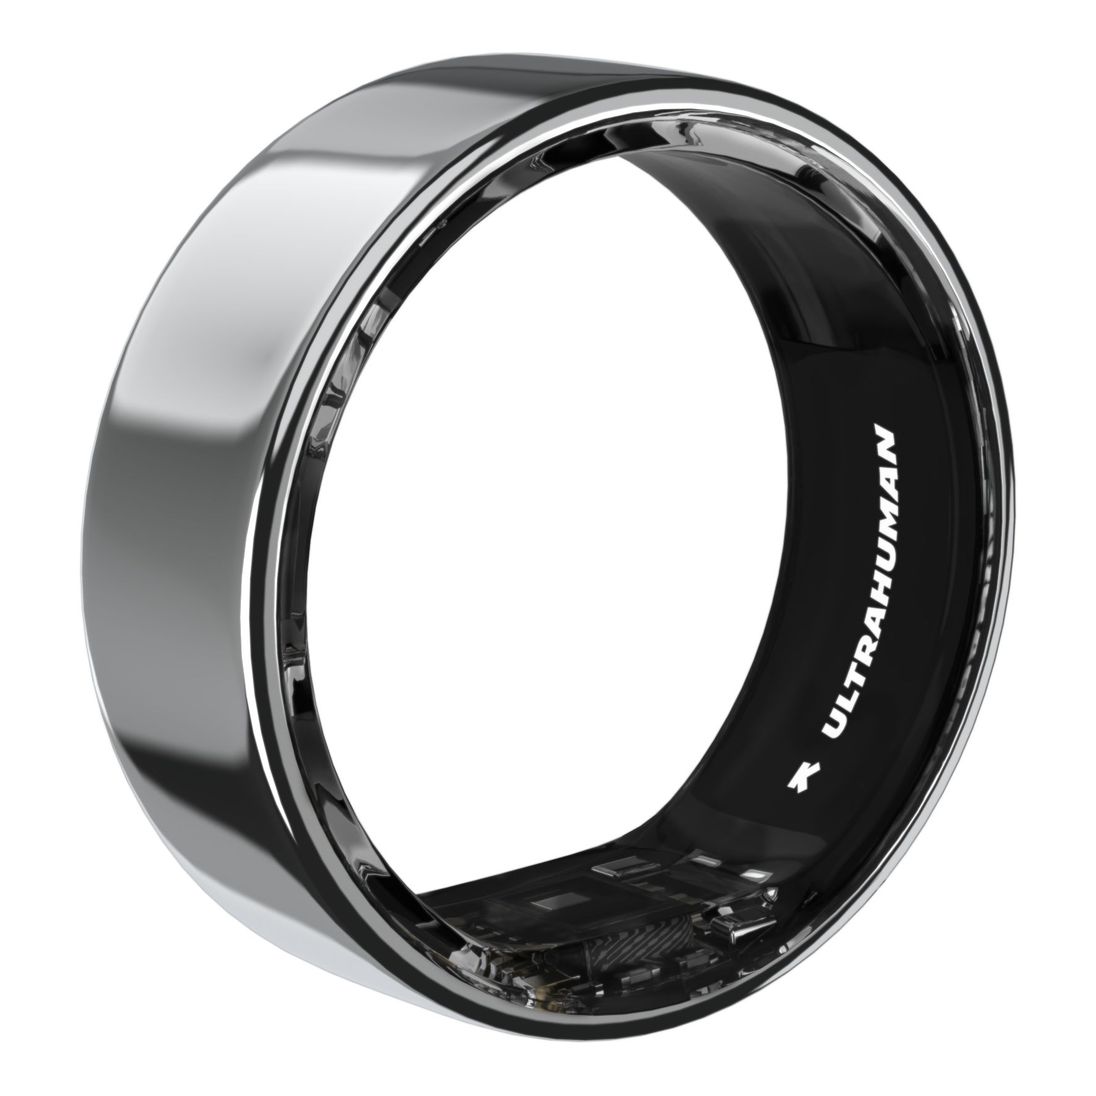 Ultrahuman Ring AIR Smart Ring - Size 10 - Space Silver